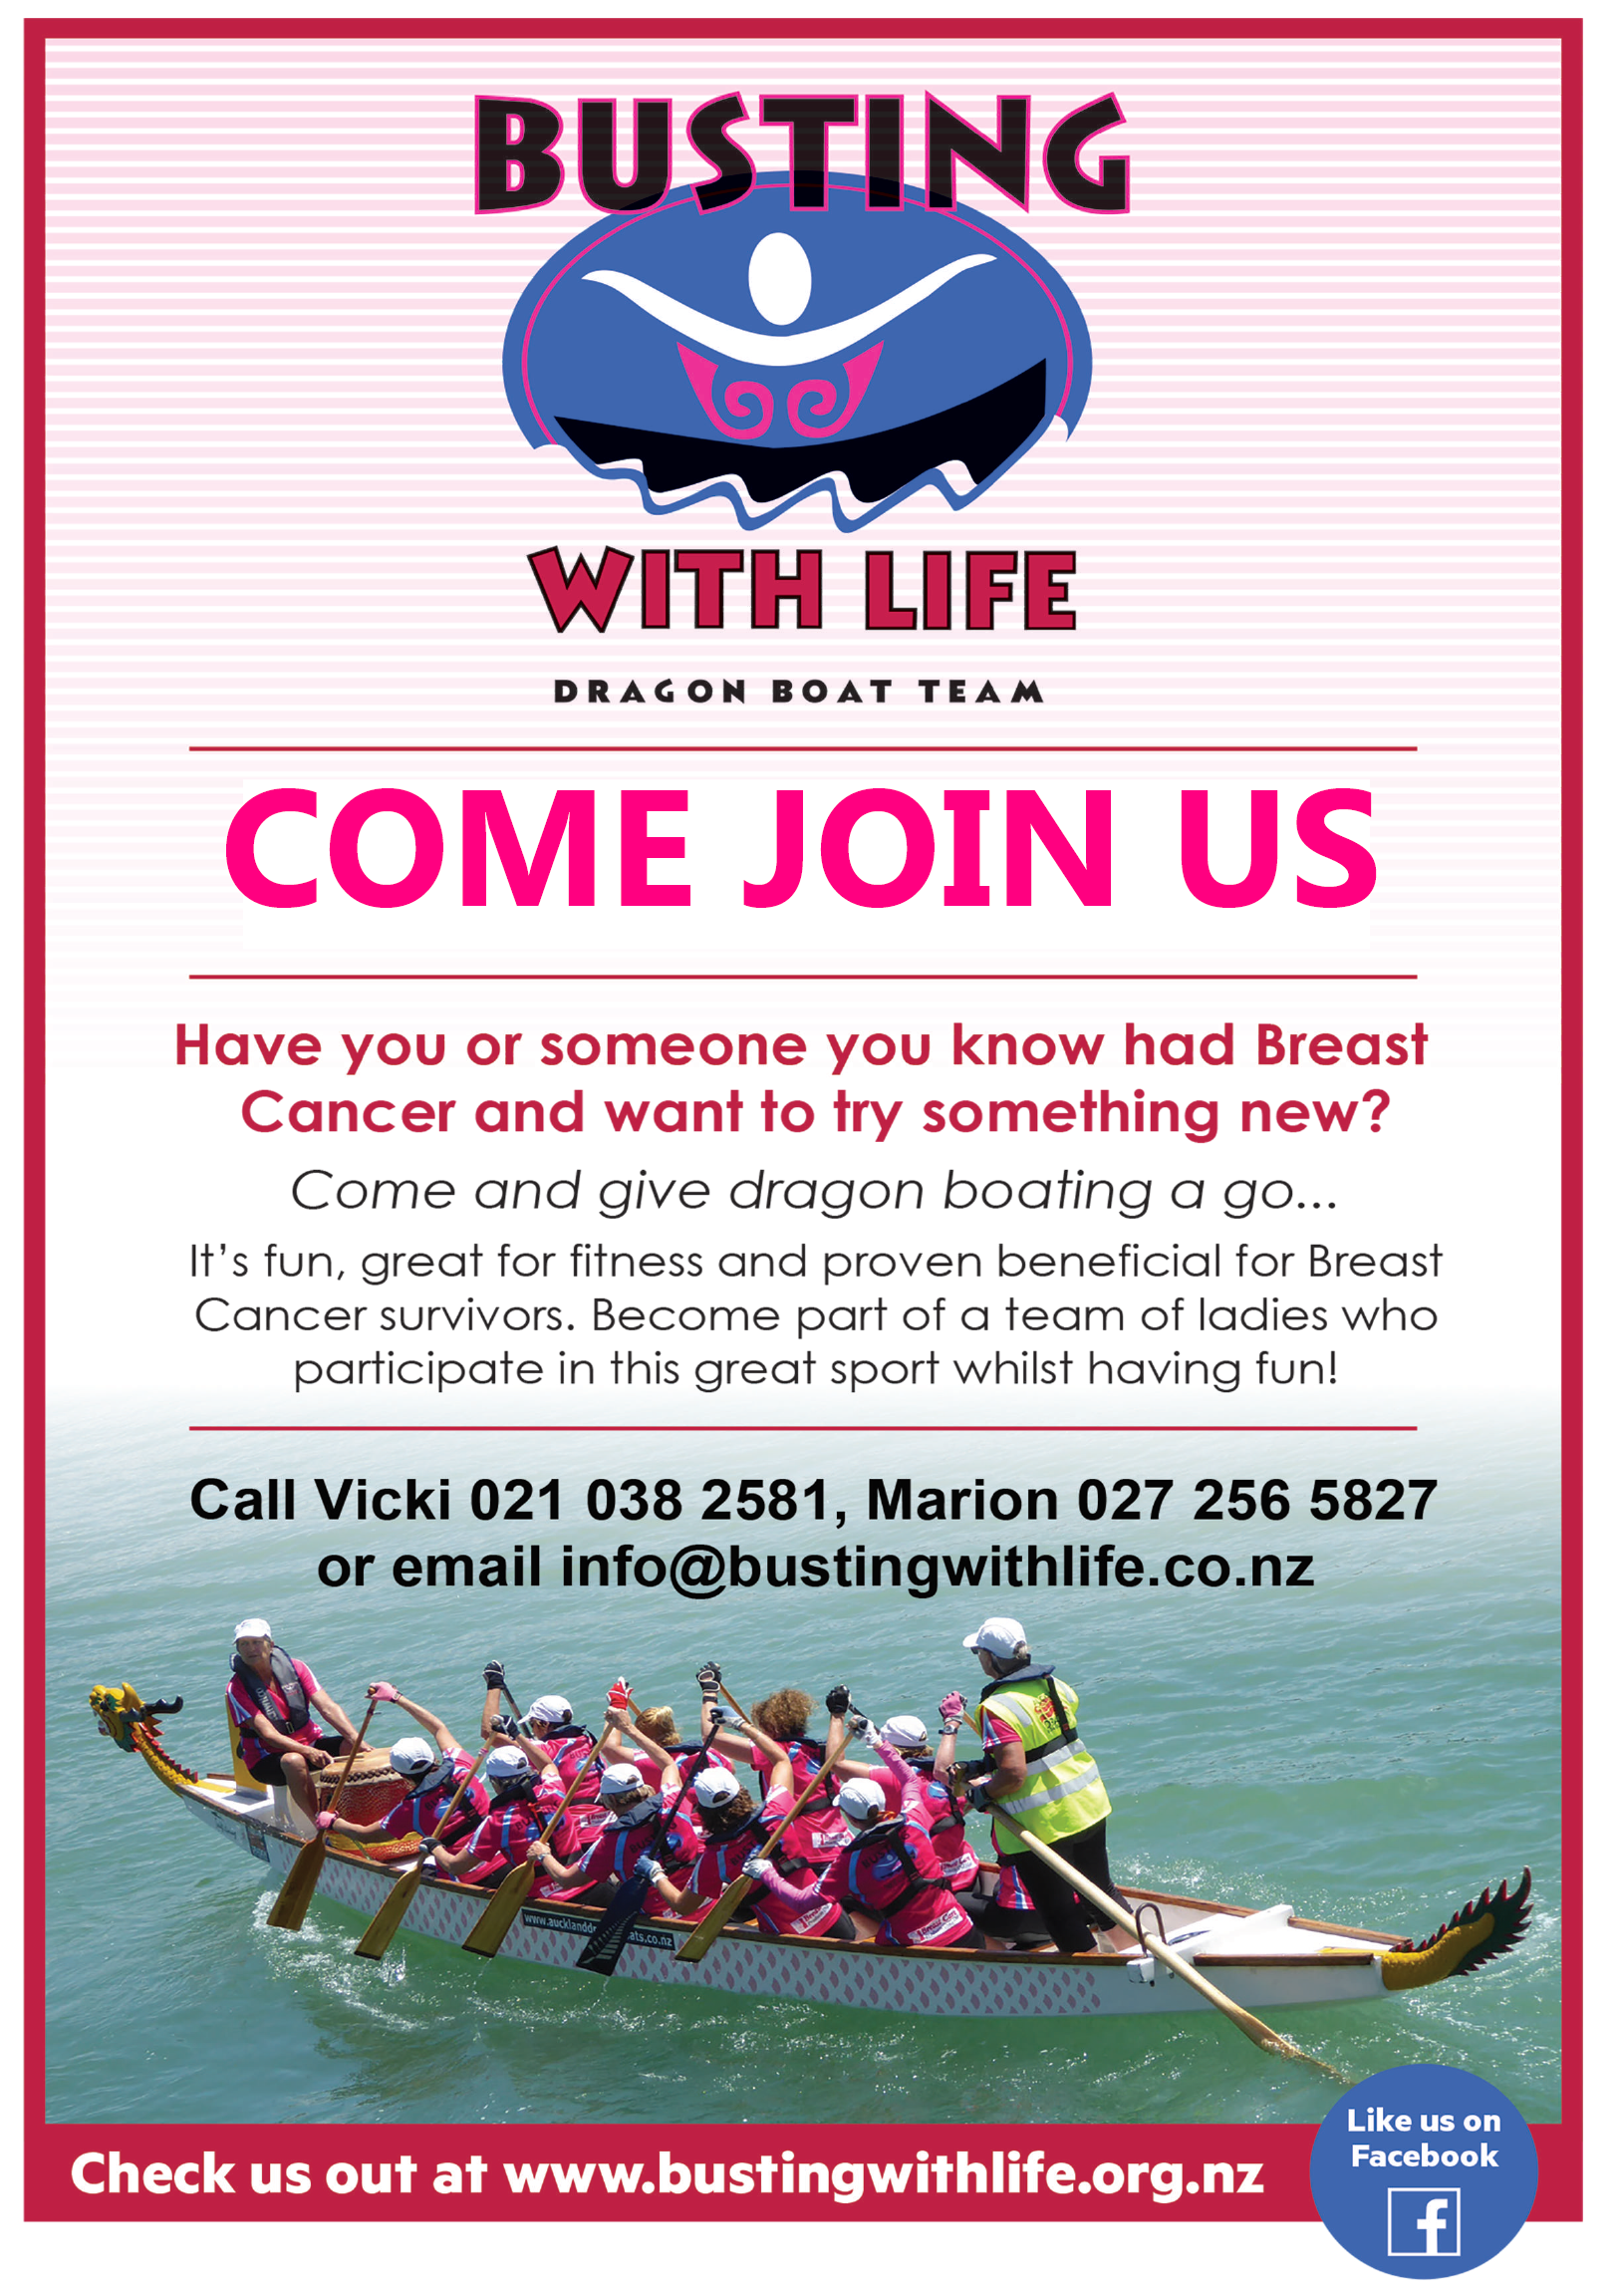 Busting With Life Dragon Boat Team Facebook